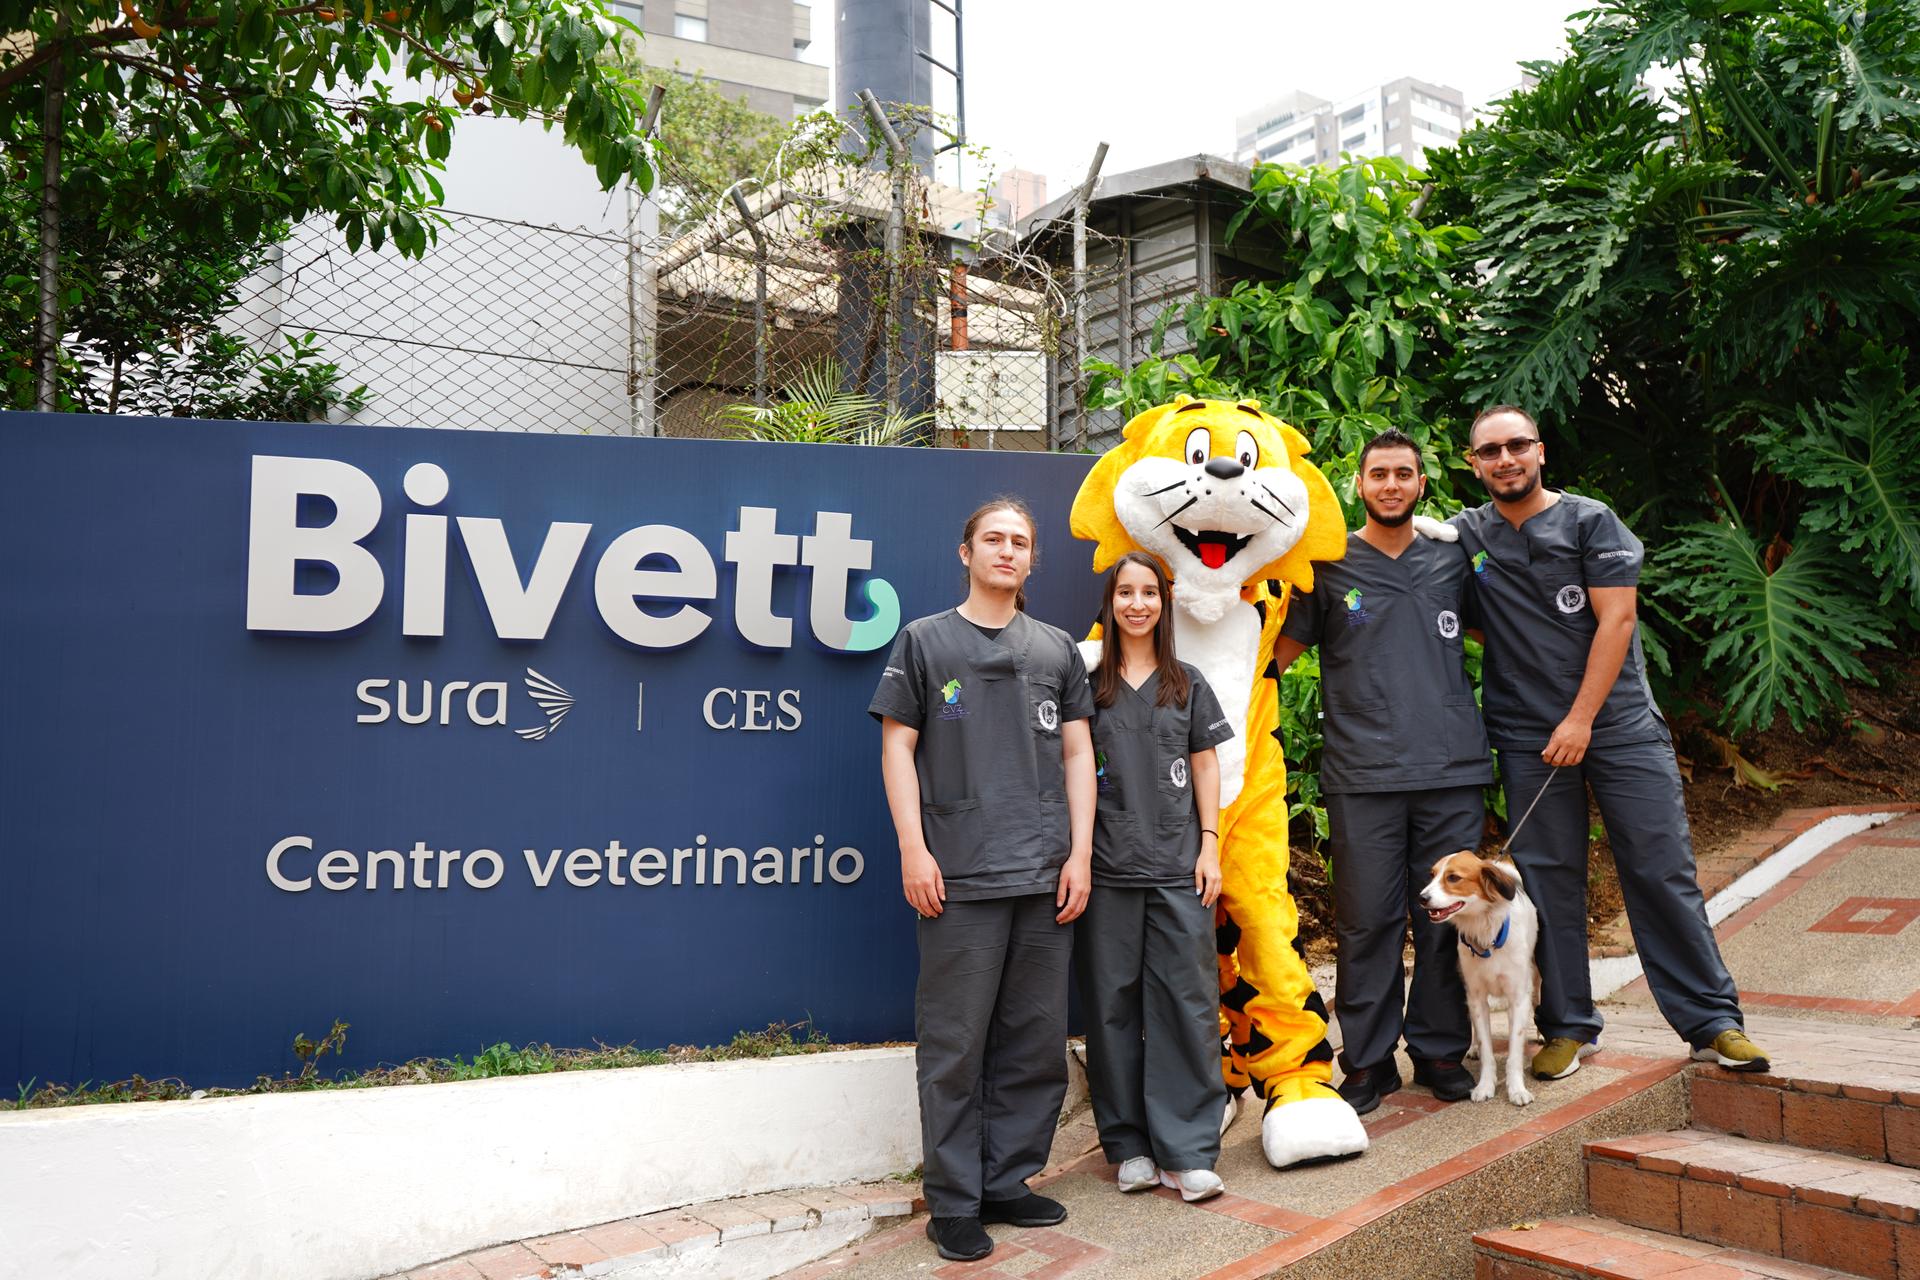 Universidad CES and Sura join forces to provide care to pets in Colombia